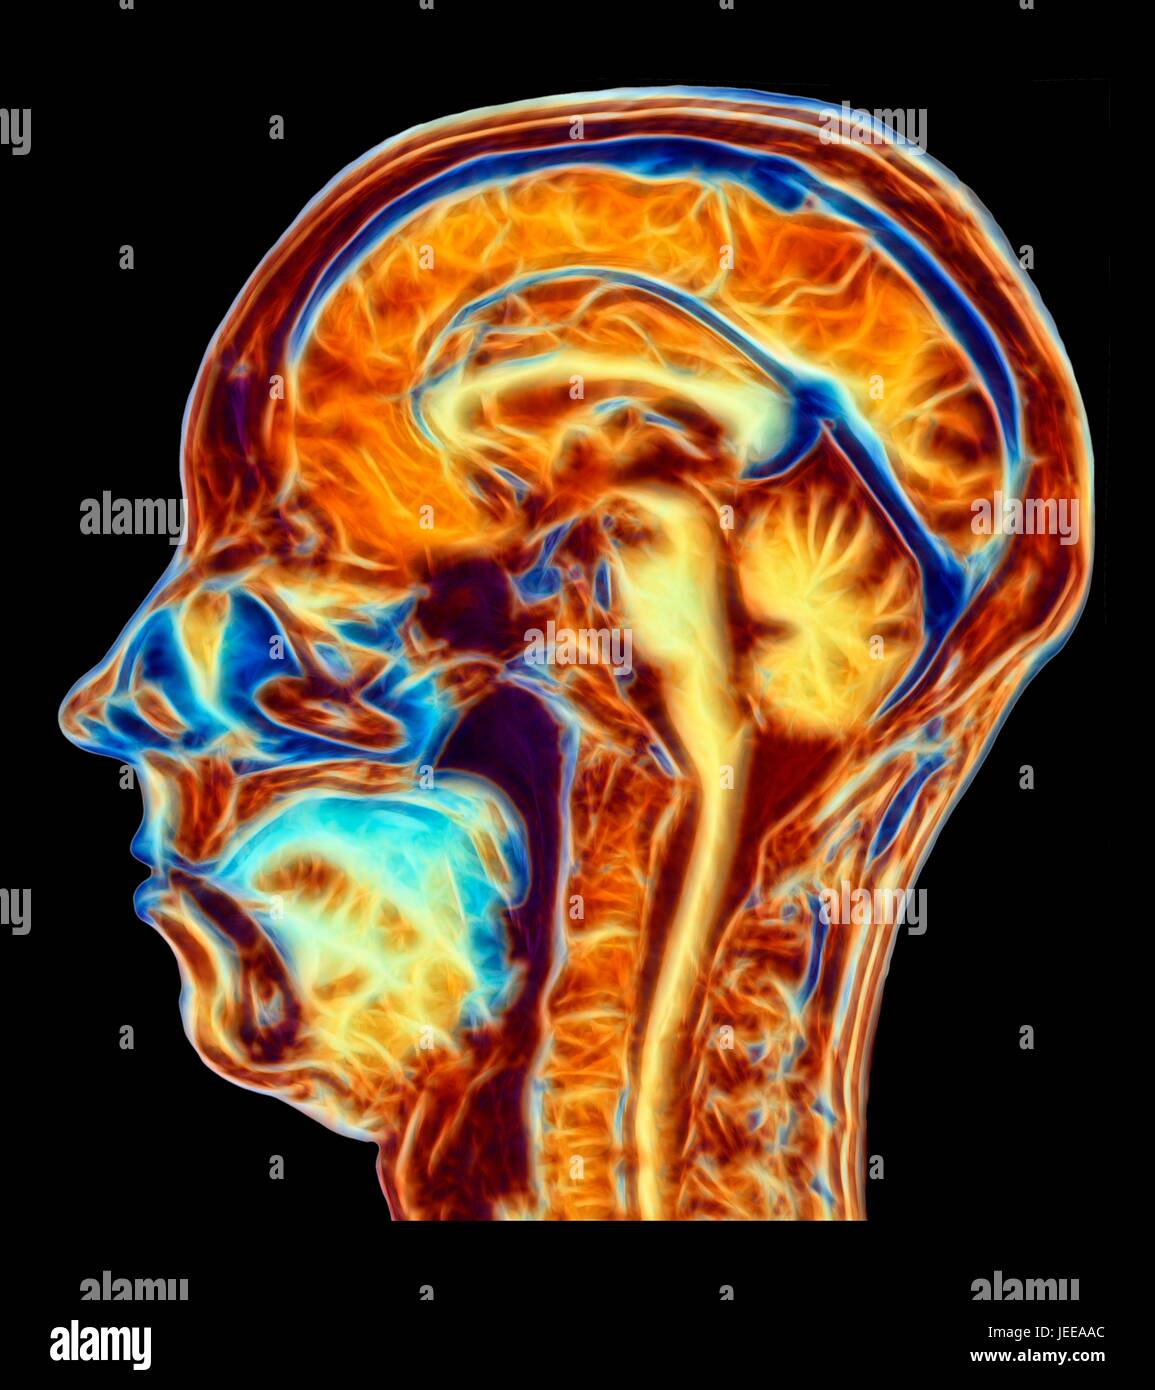 Computer enhanced false-colour Magnetic Resonance Image (MRI) of a mid-sagittal section through the head of a normal 46 year-old woman, showing structures of the brain, spine & facial tissues. Profiled features of the main part of the brain include the convoluted surface of the cerebral cortex, the corpus callosum, pons & medulla, structures of the brainstem, which are continuous with the spinal cord. The cerebellum, the centre of balance & coordination, lies to the right of the brainstem. Stock Photo